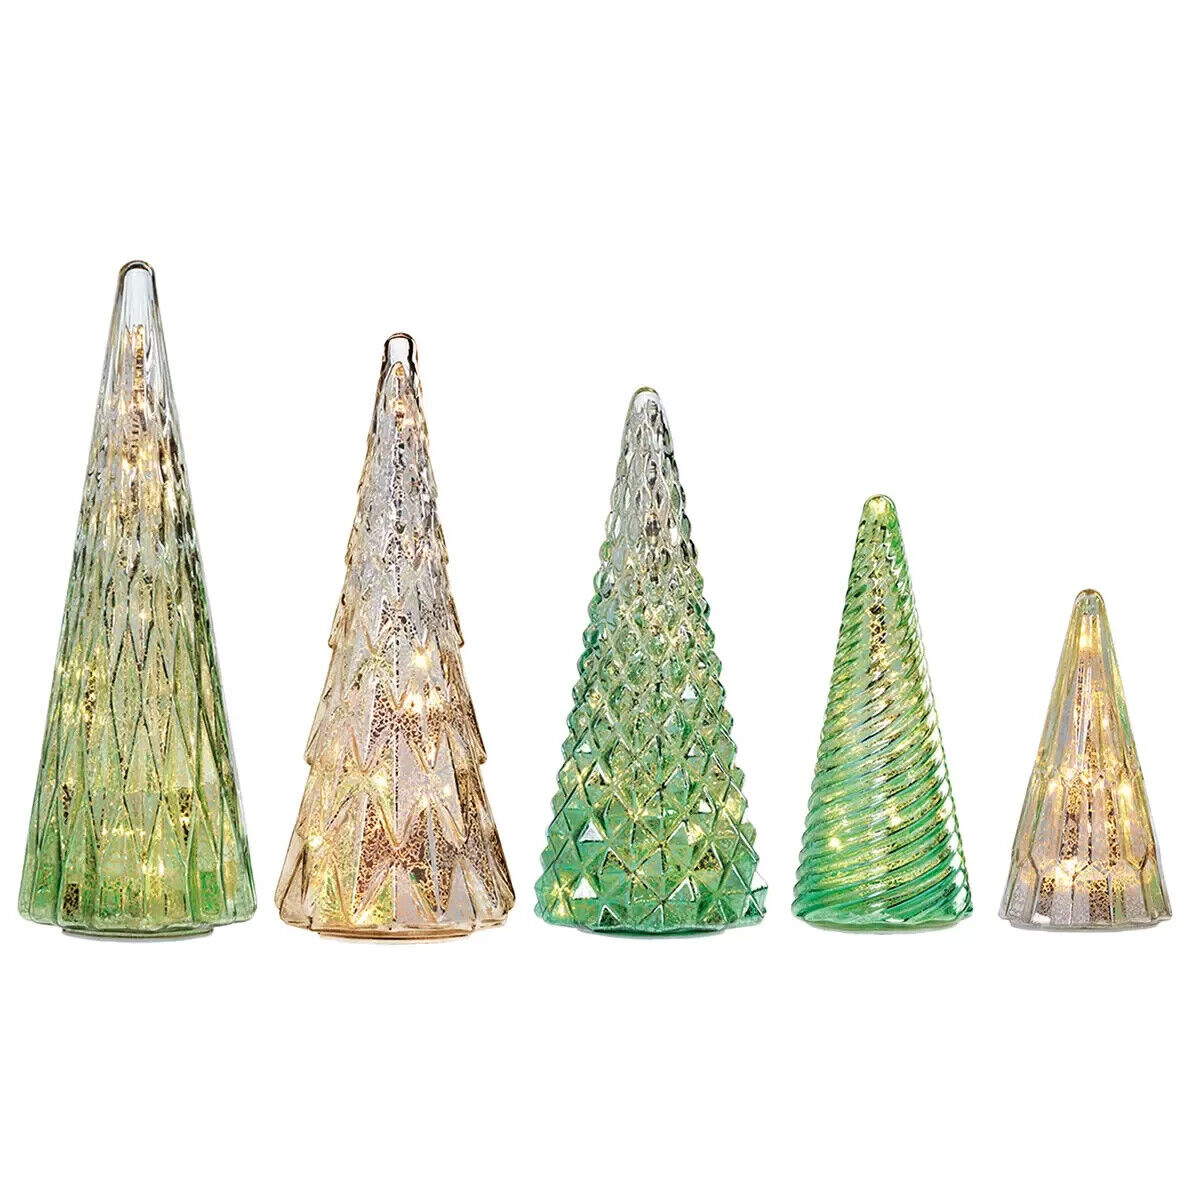 COSTCO Christmas Set of 5 Glass Trees with LED Lights in Green